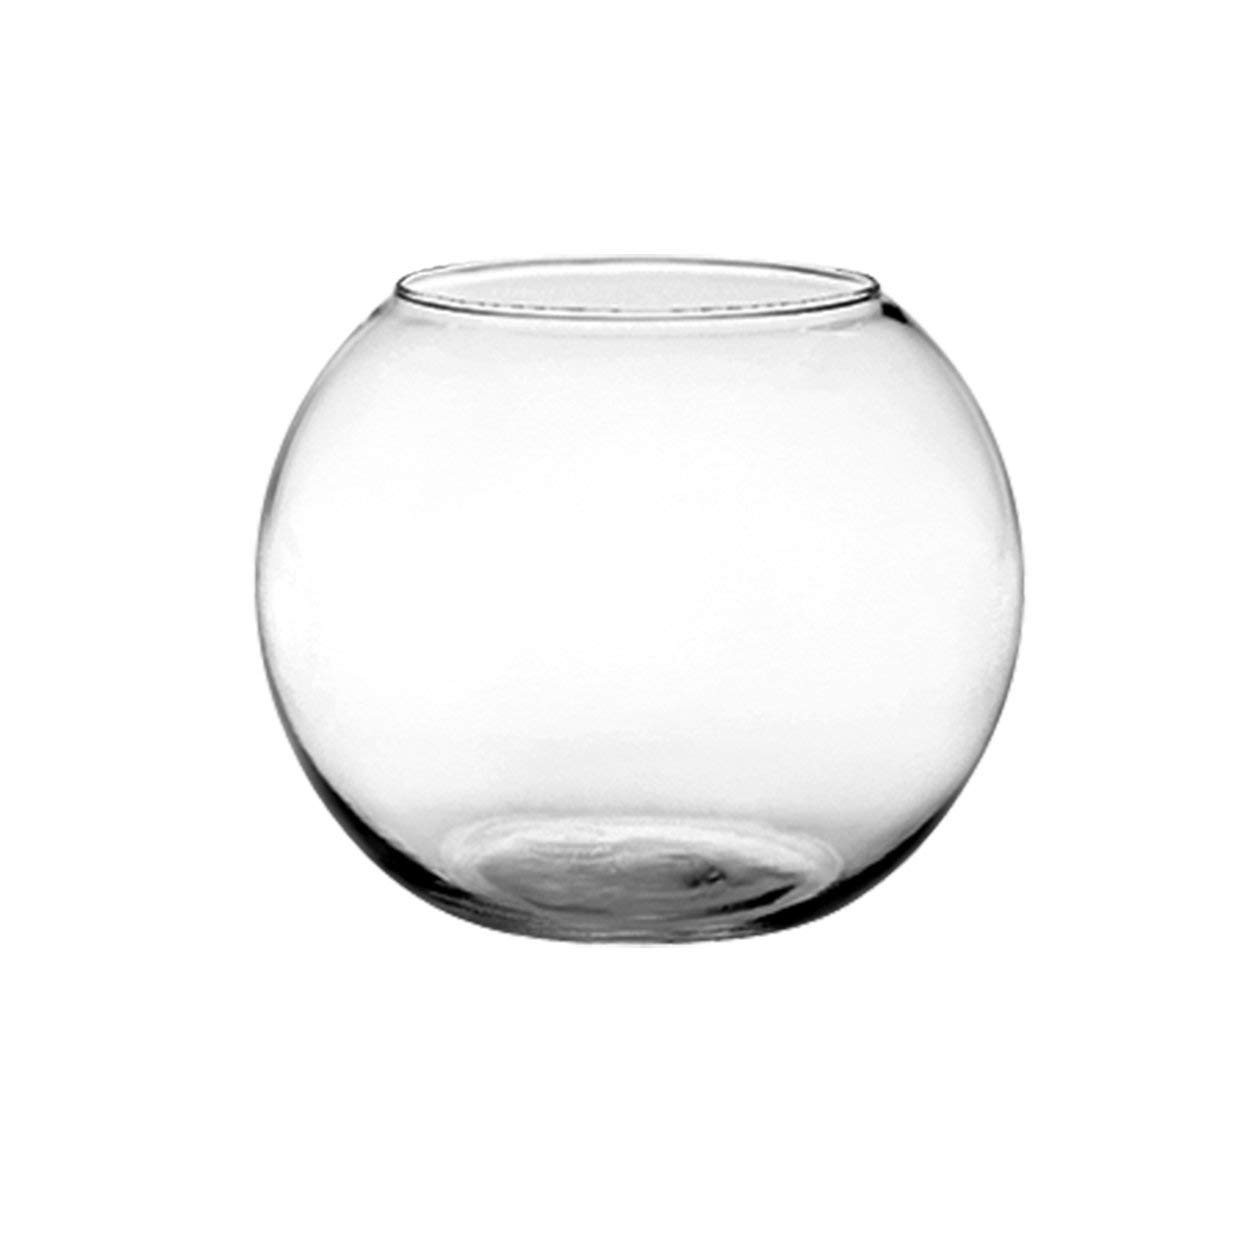 24 Lovable Glass Bubble Fish Bowl Vase 2024 free download glass bubble fish bowl vase of amazon com set of 4 syndicate sales 6 inches clear rose bowl throughout amazon com set of 4 syndicate sales 6 inches clear rose bowl bundled by maven gifts gar